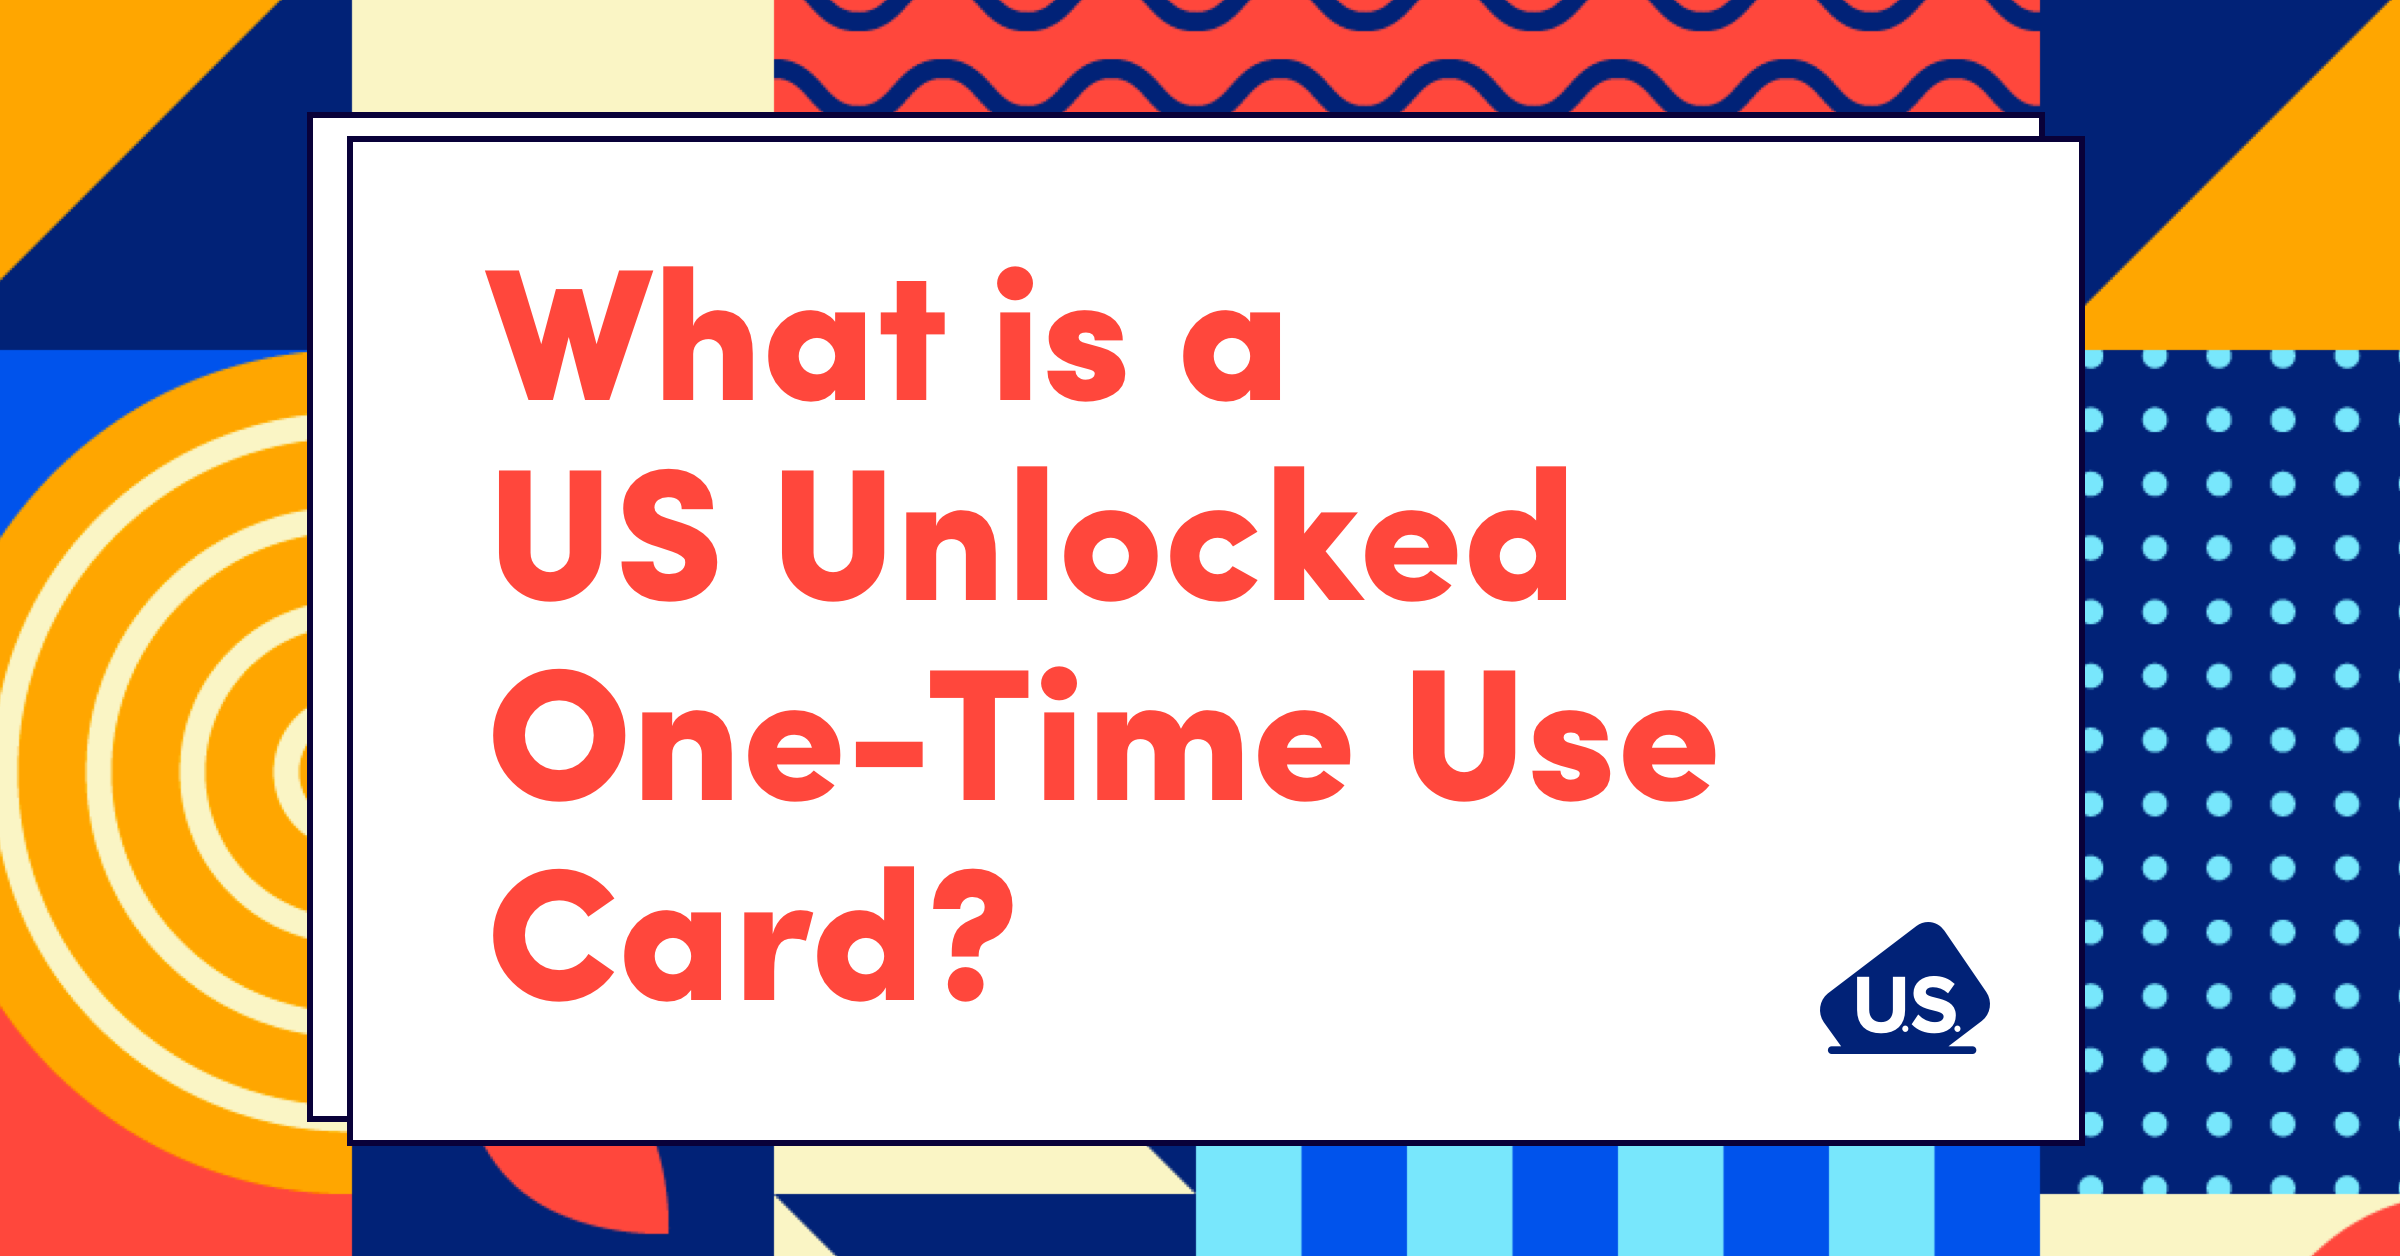 How to use the One-Time Use Card